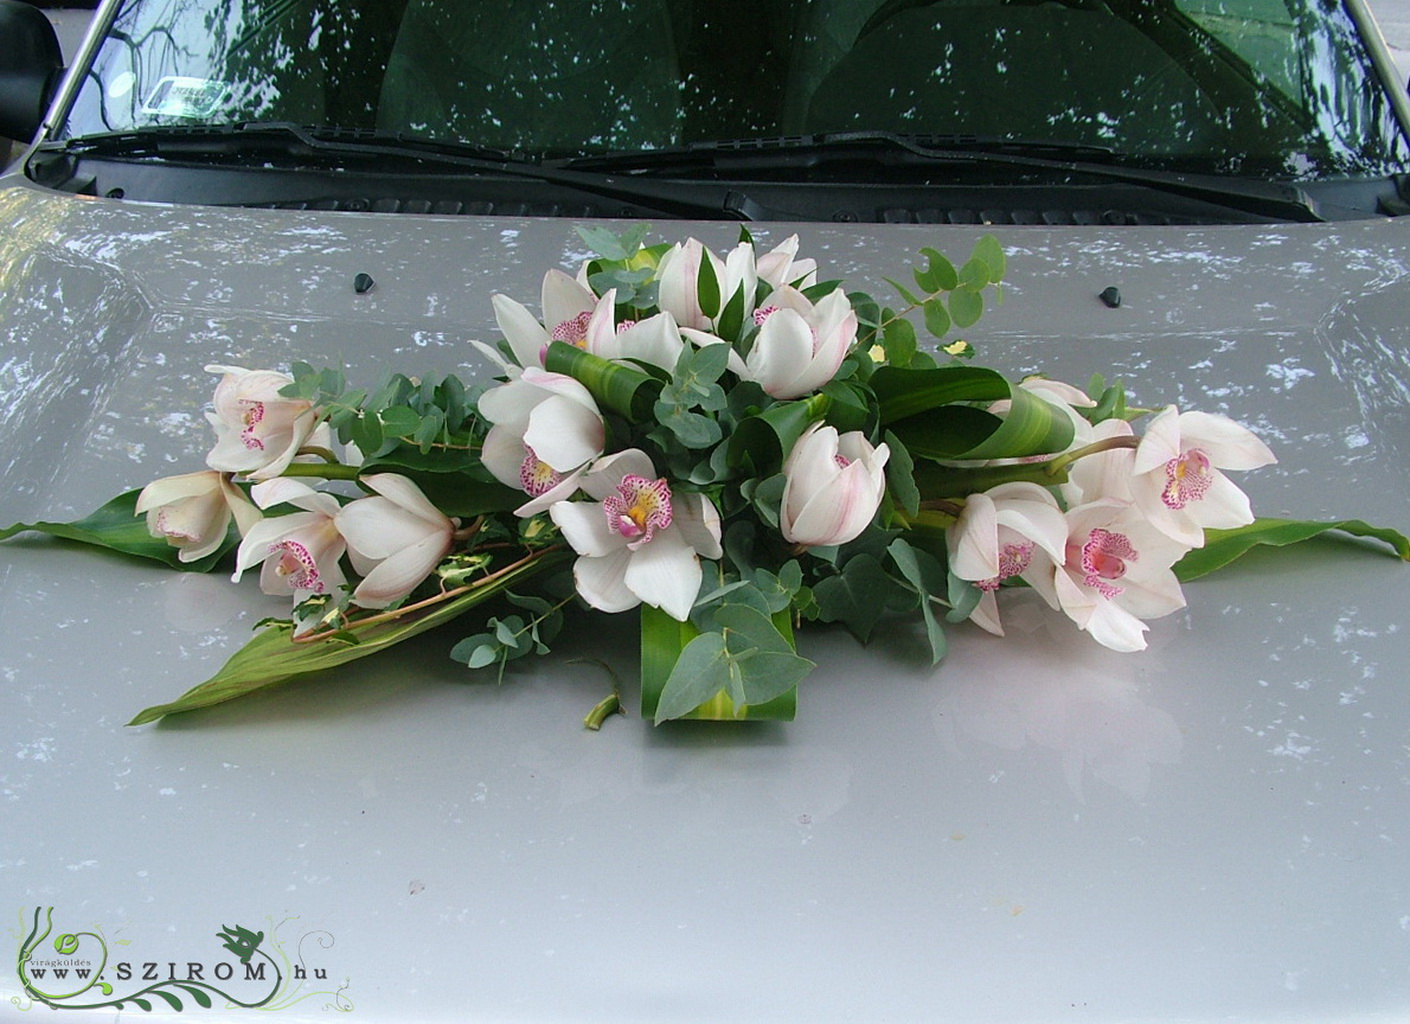 flower delivery Budapest - oval car flower arrangement with Cymbidium orchids (white)